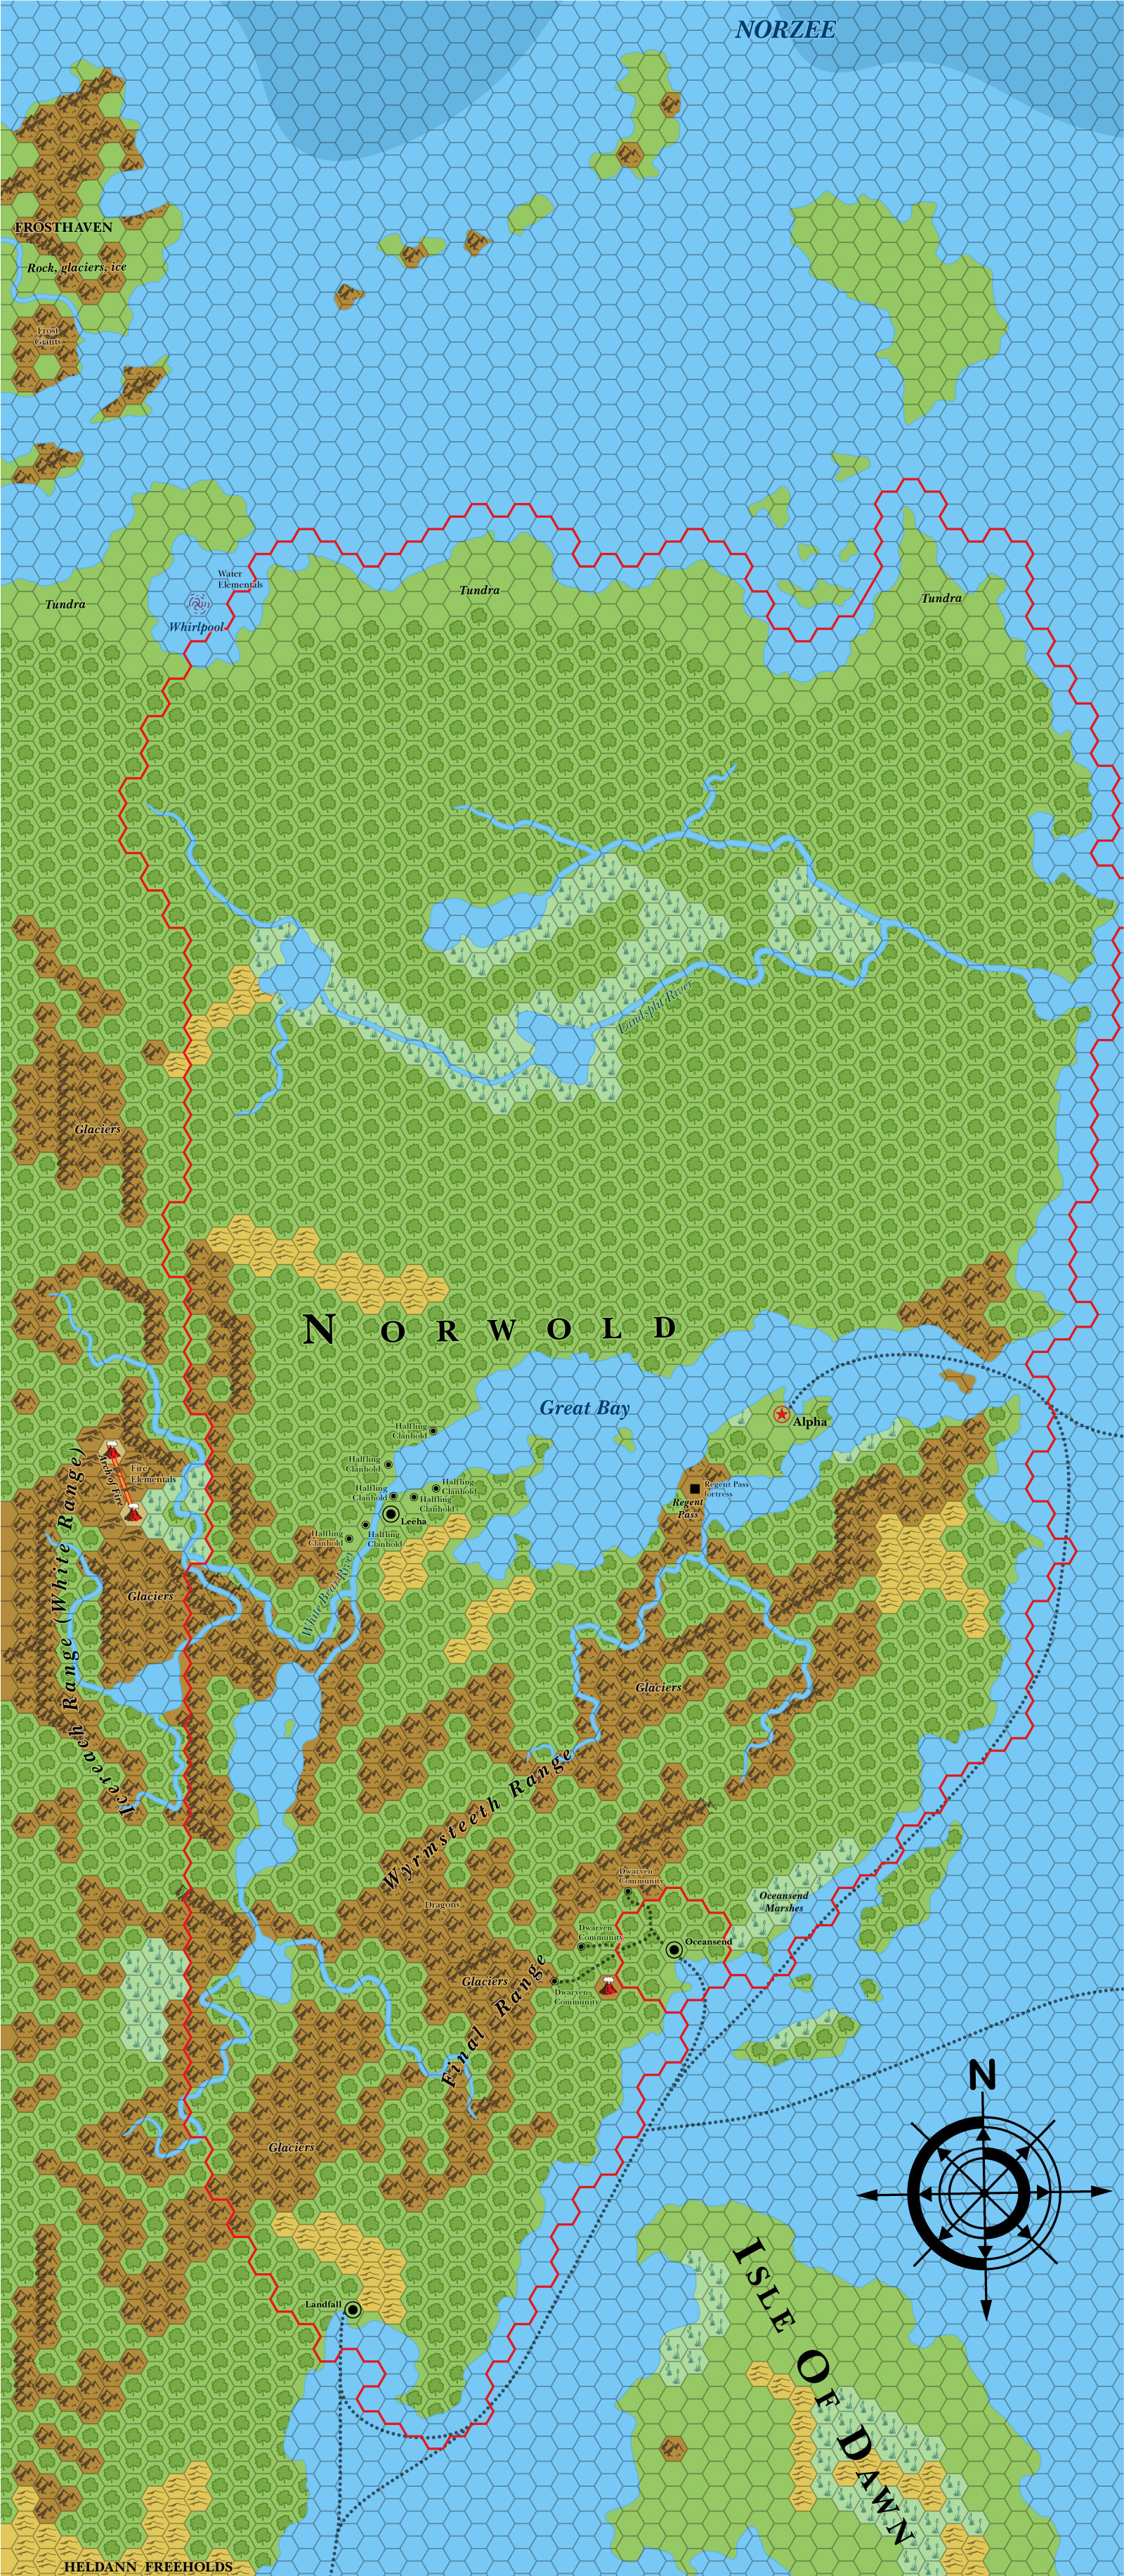 Norwold, 24 miles per hex (1985)